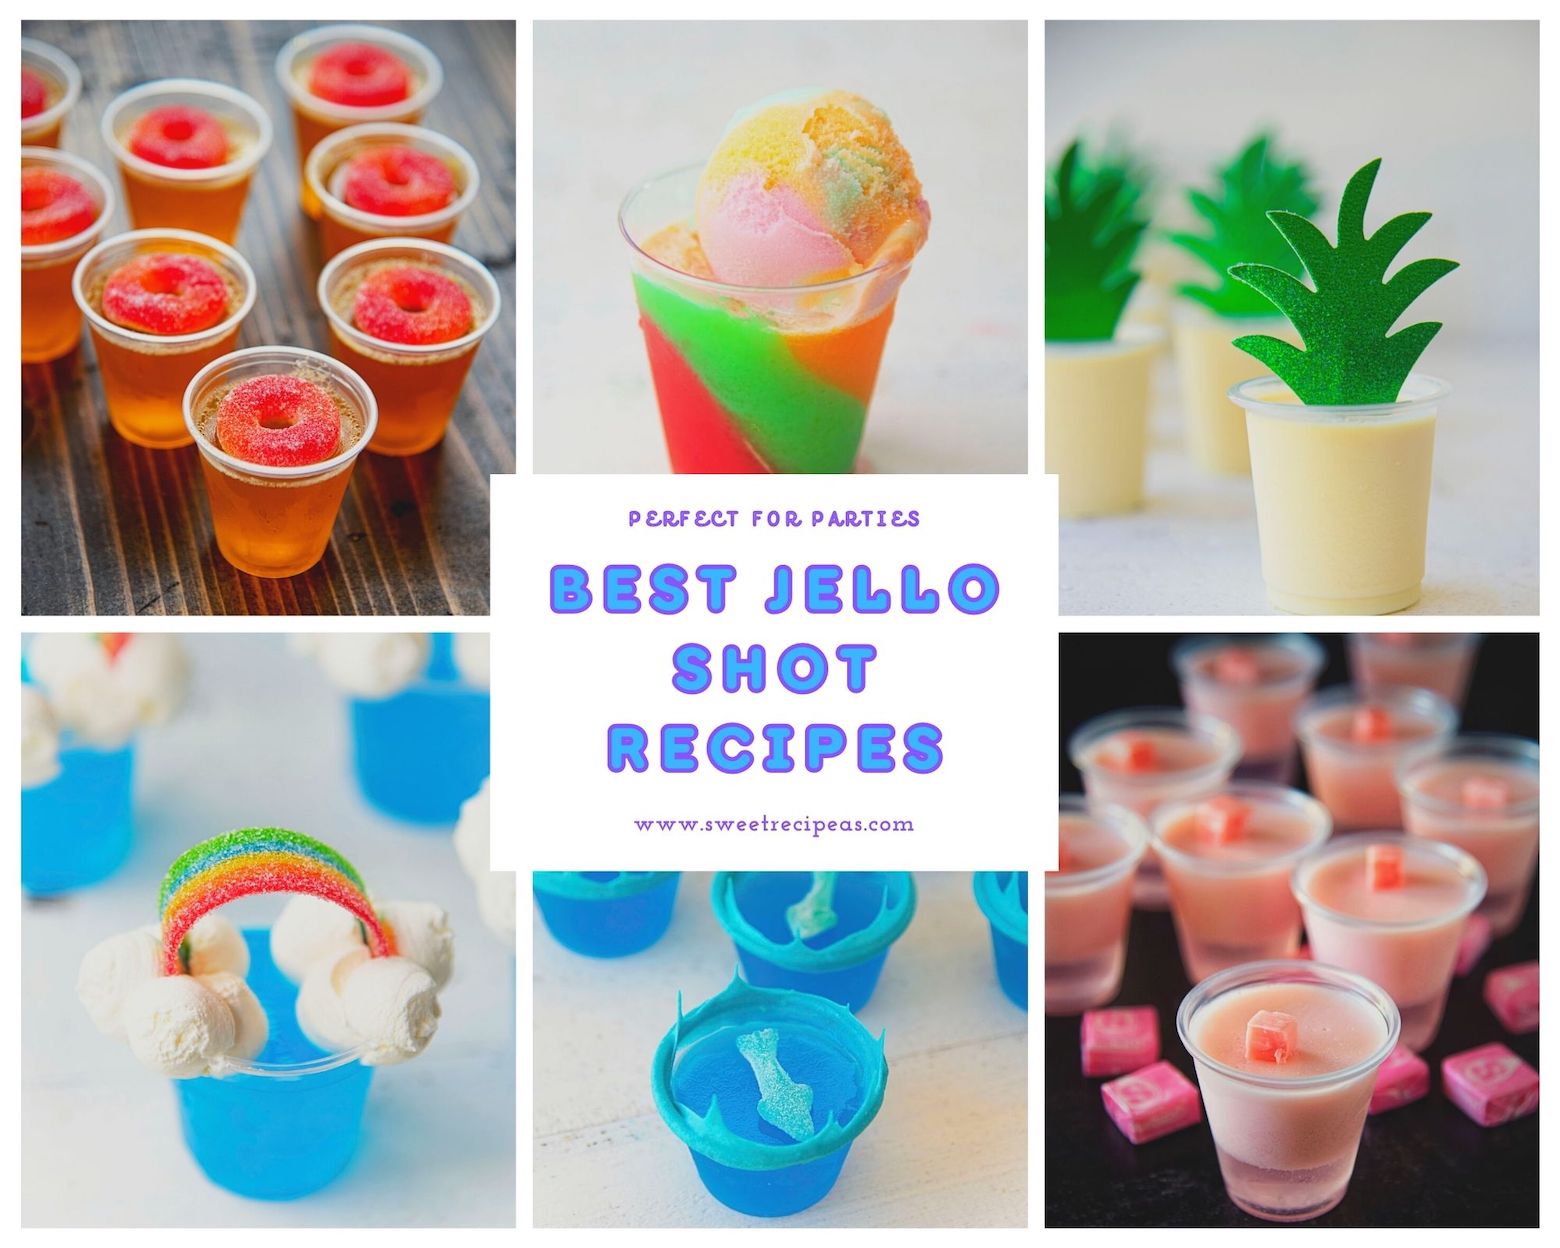 Collage picture with various shots and a sign that says Best Jello Shot Recipes 